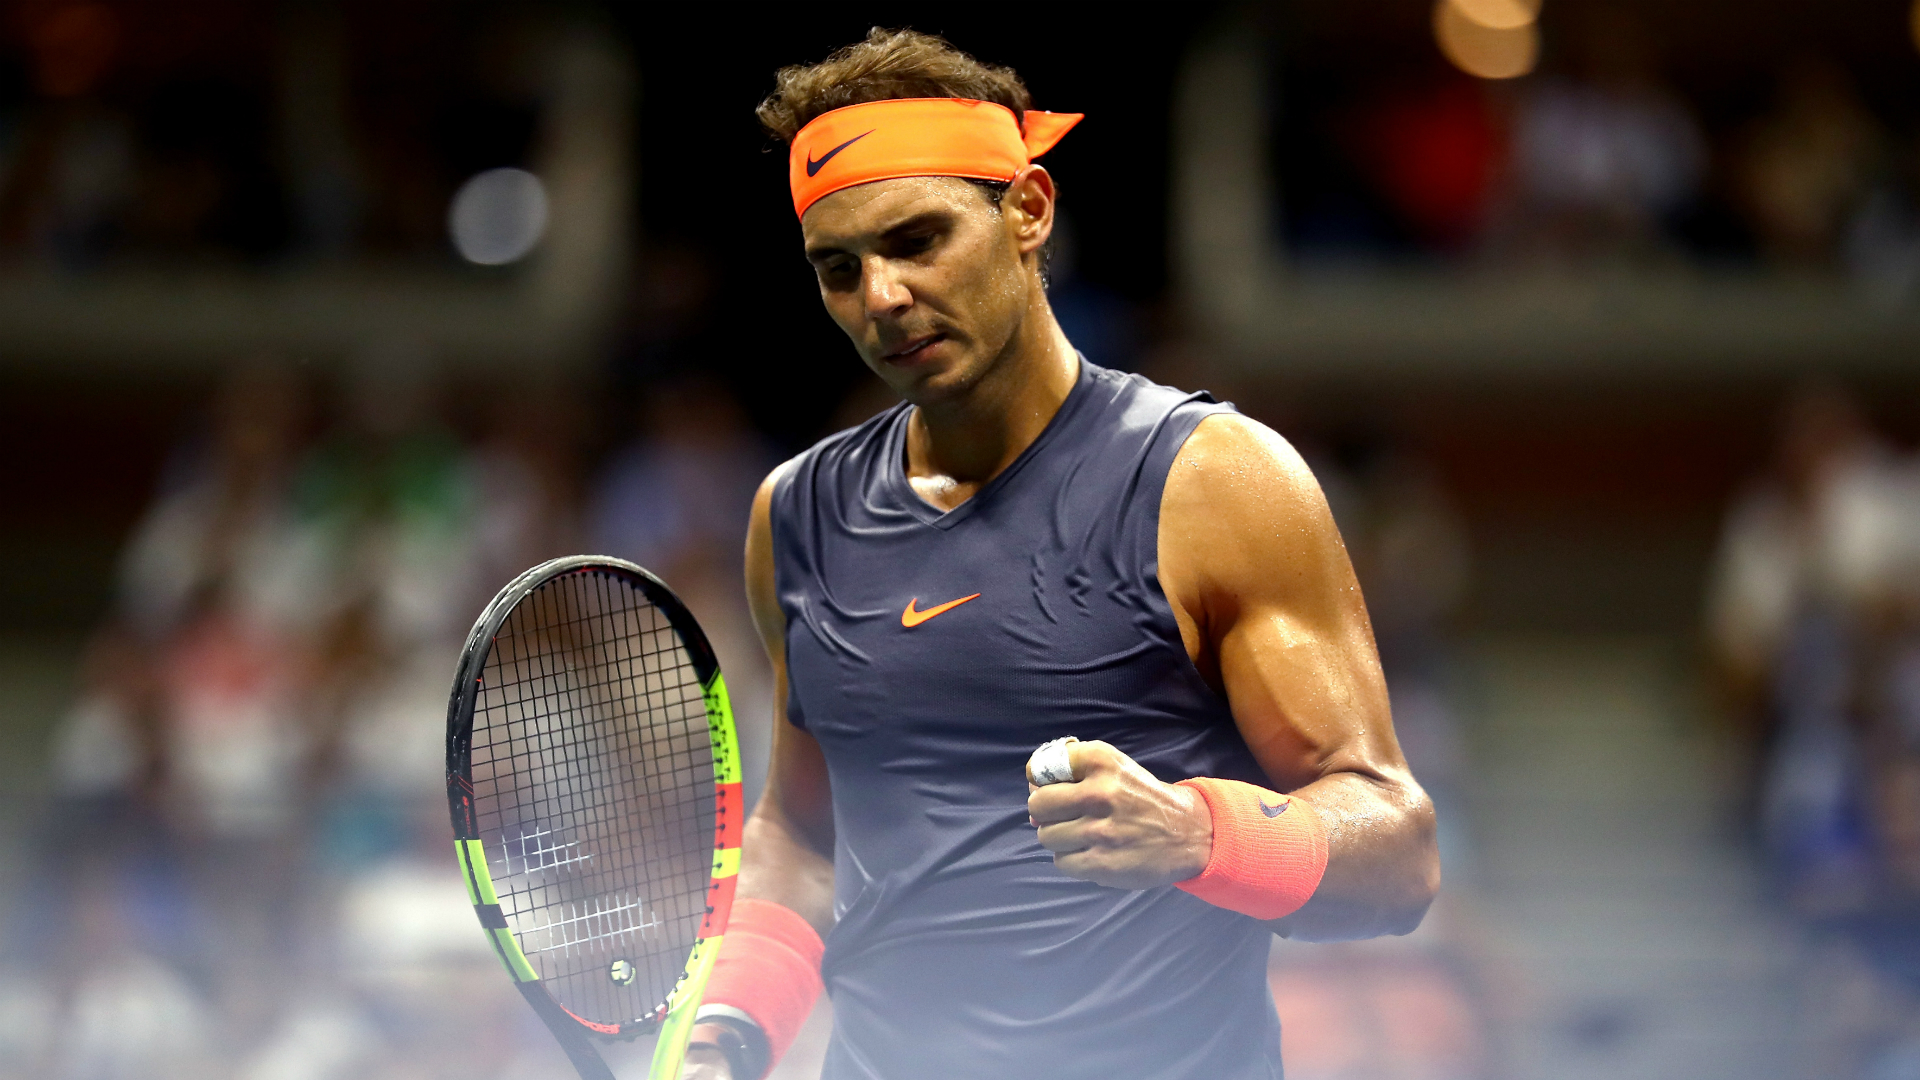 Nadal outlasts Thiem in US Open classic to reach semis | Sporting News